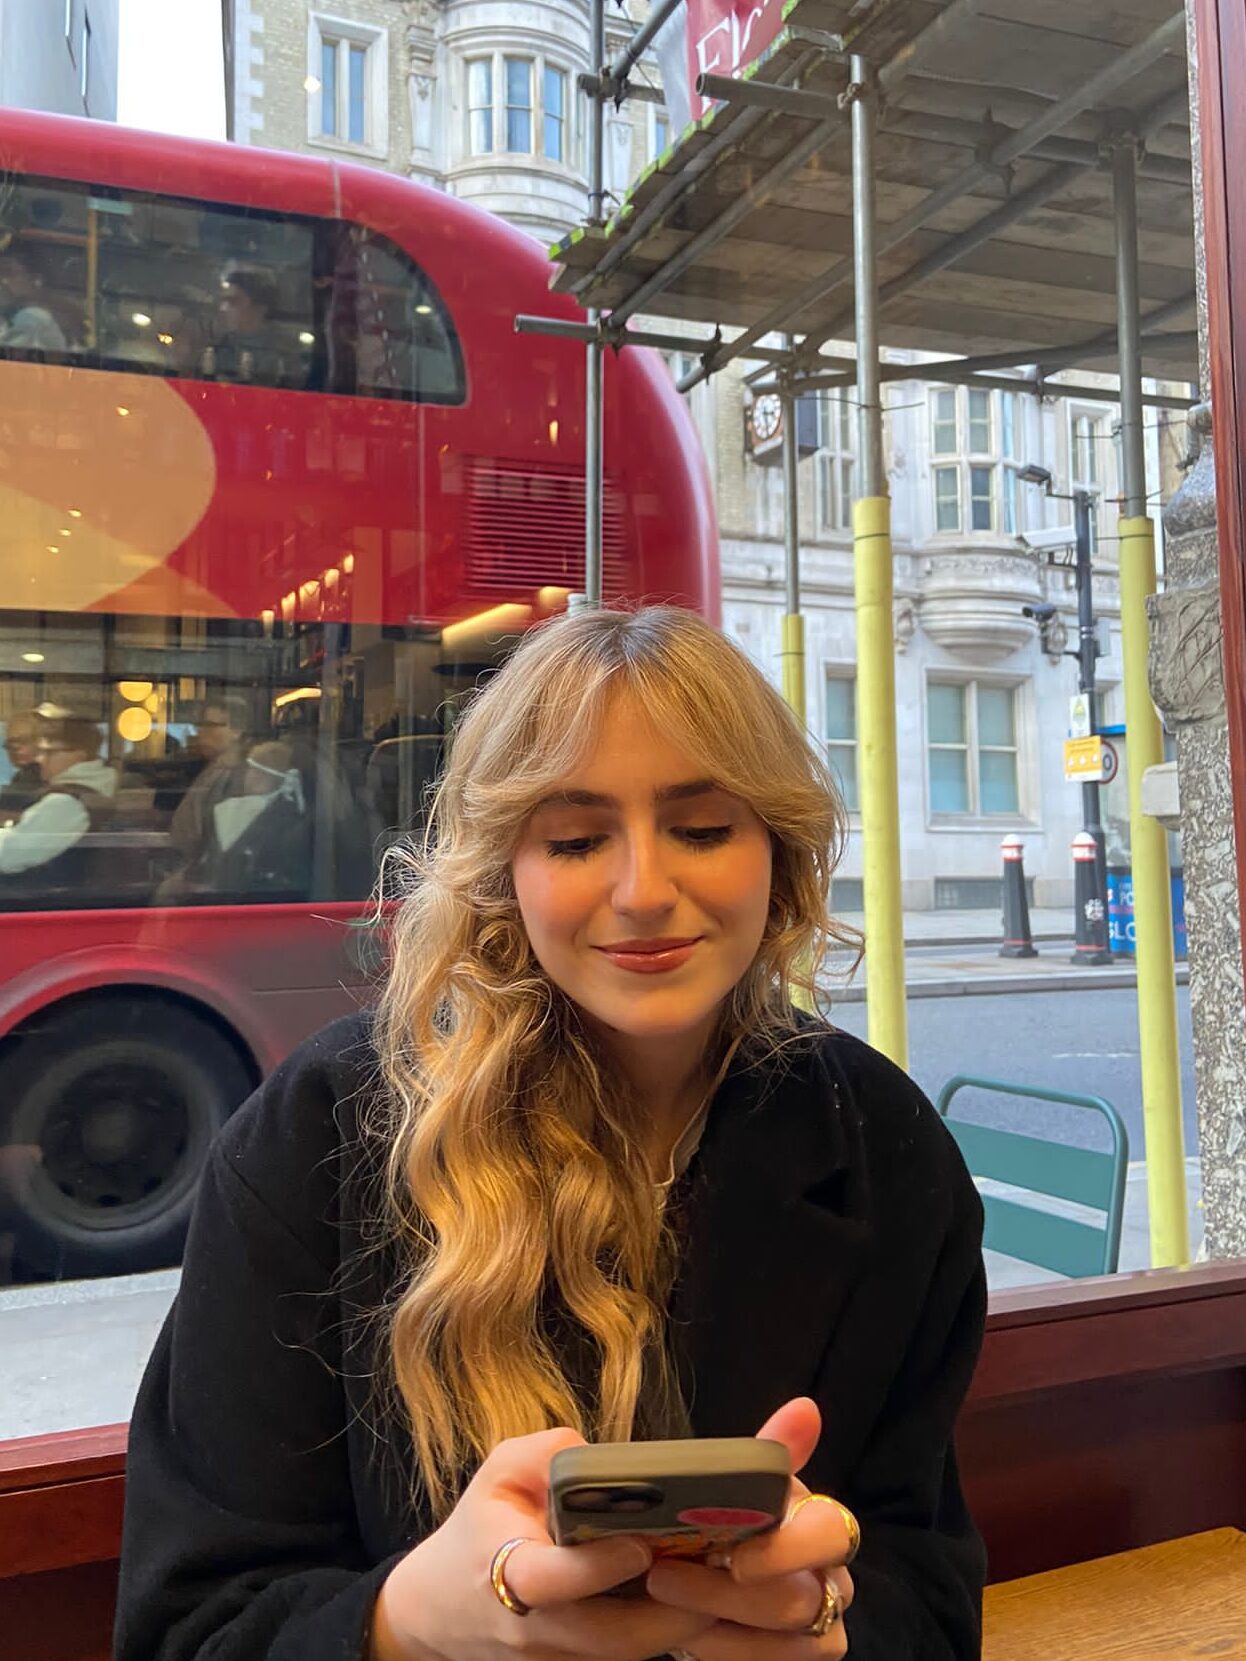 Carmen, a white blonde woman, is sitting in a coffee shop looking down at her phone and smiling.